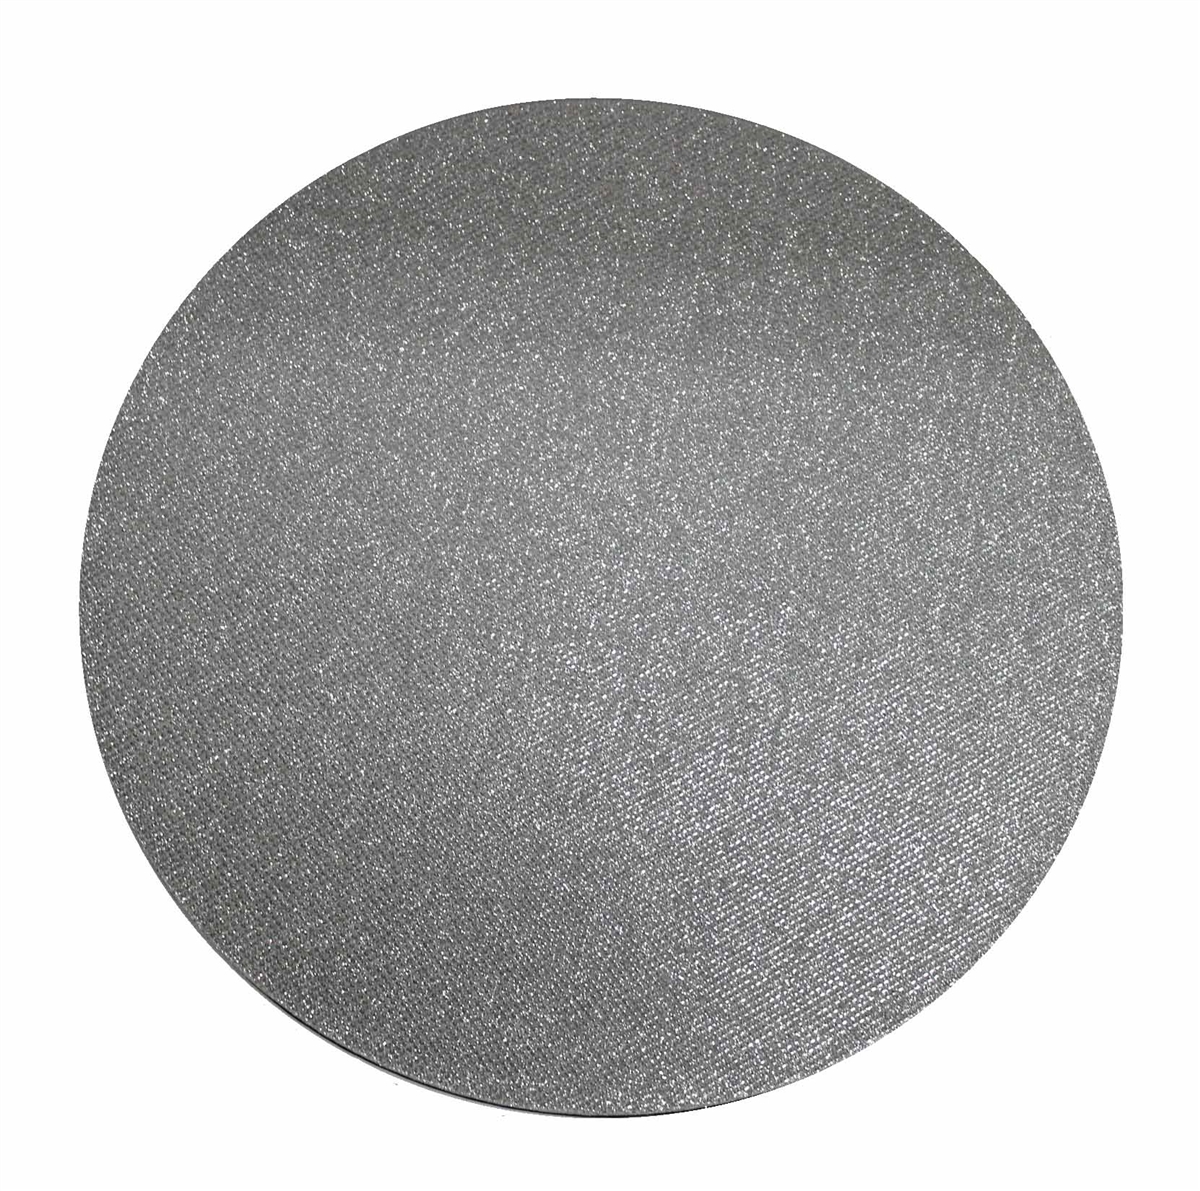 Water Resistant  Silver Glitter Charger - Extra Heavyweight Cardboard